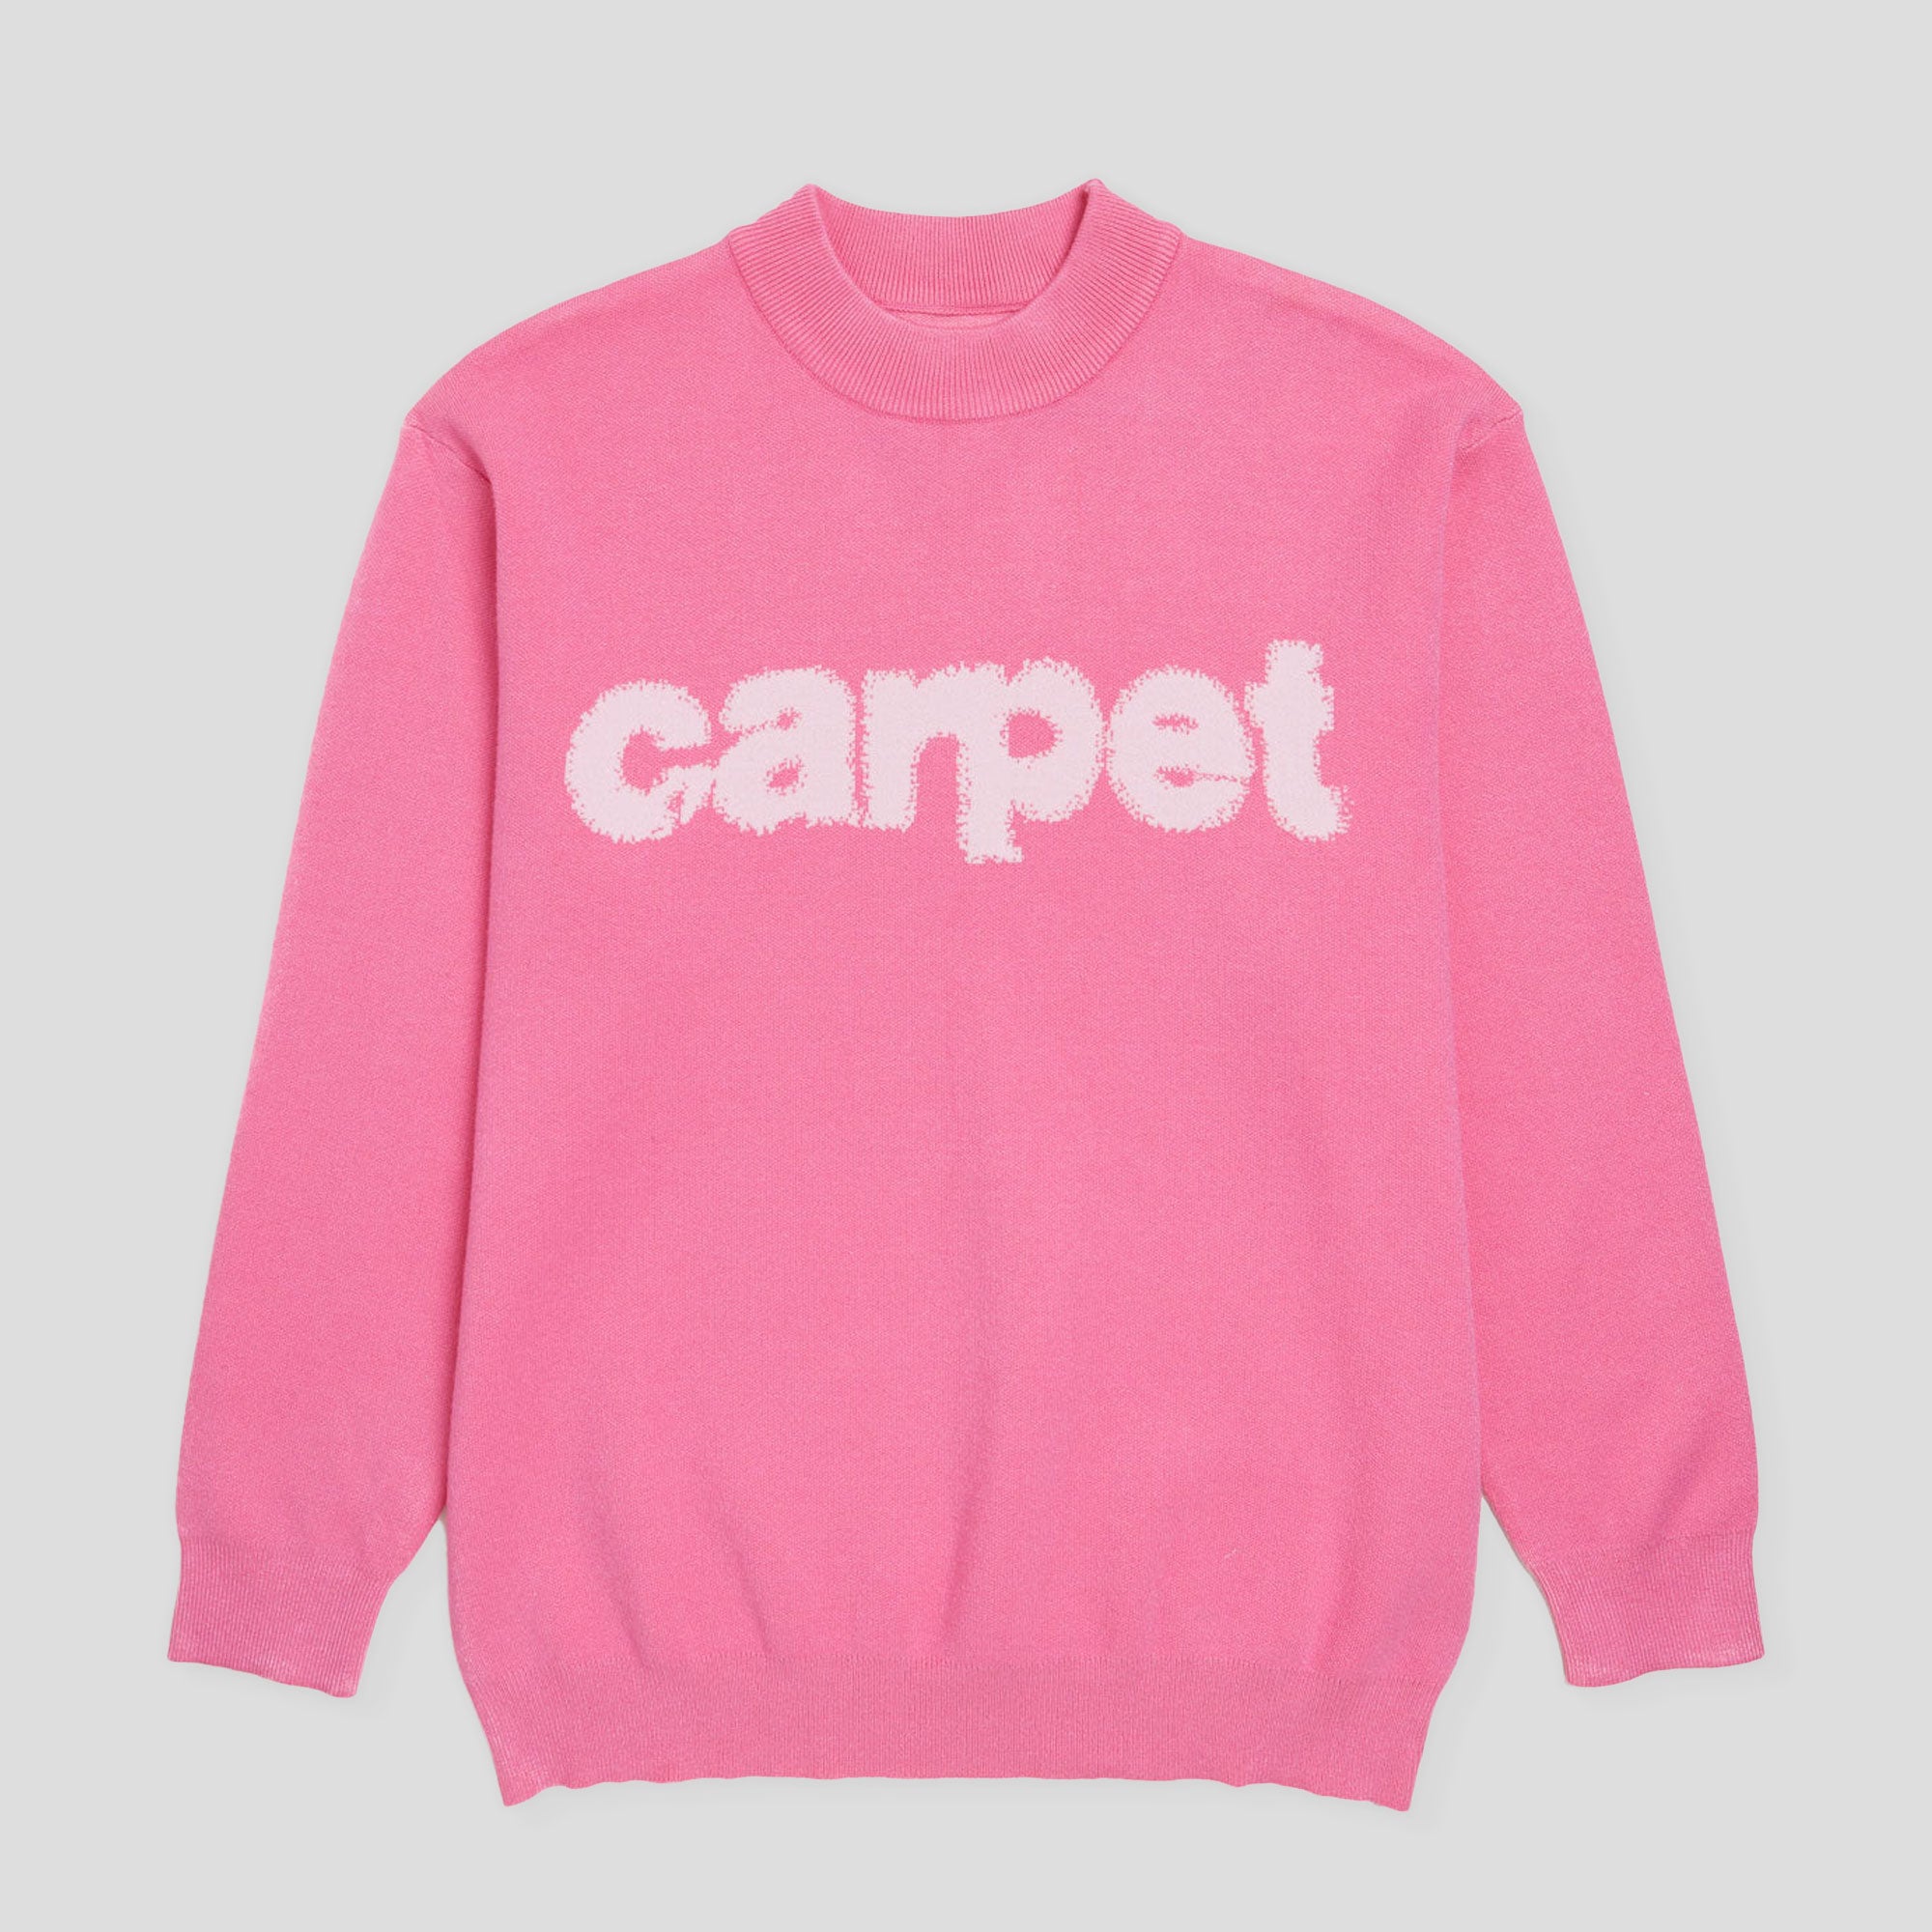 Carpet Company Woven Sweater - Pink